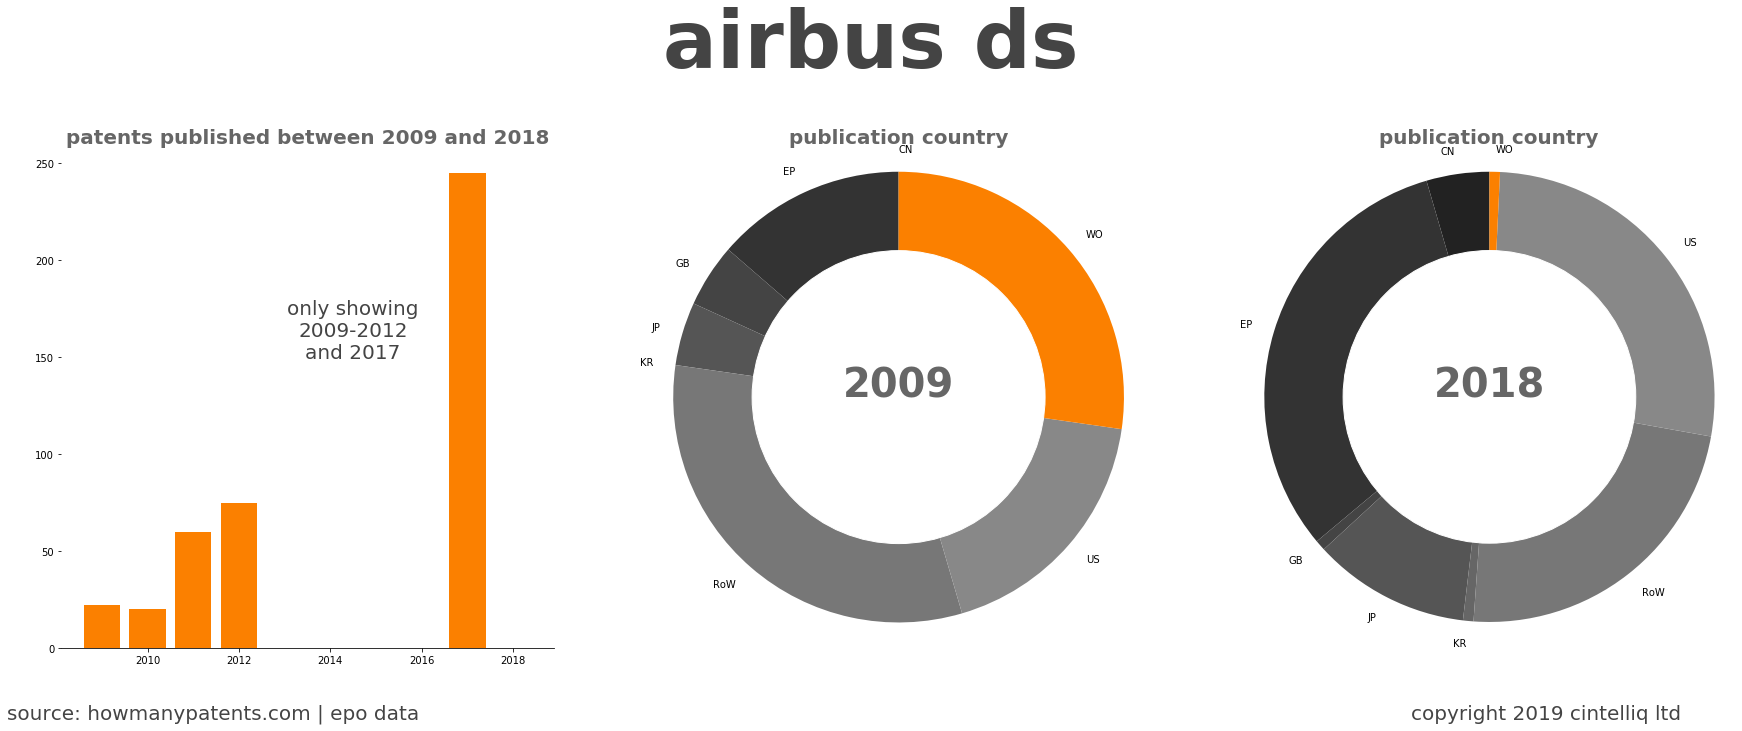 summary of patents for Airbus Ds